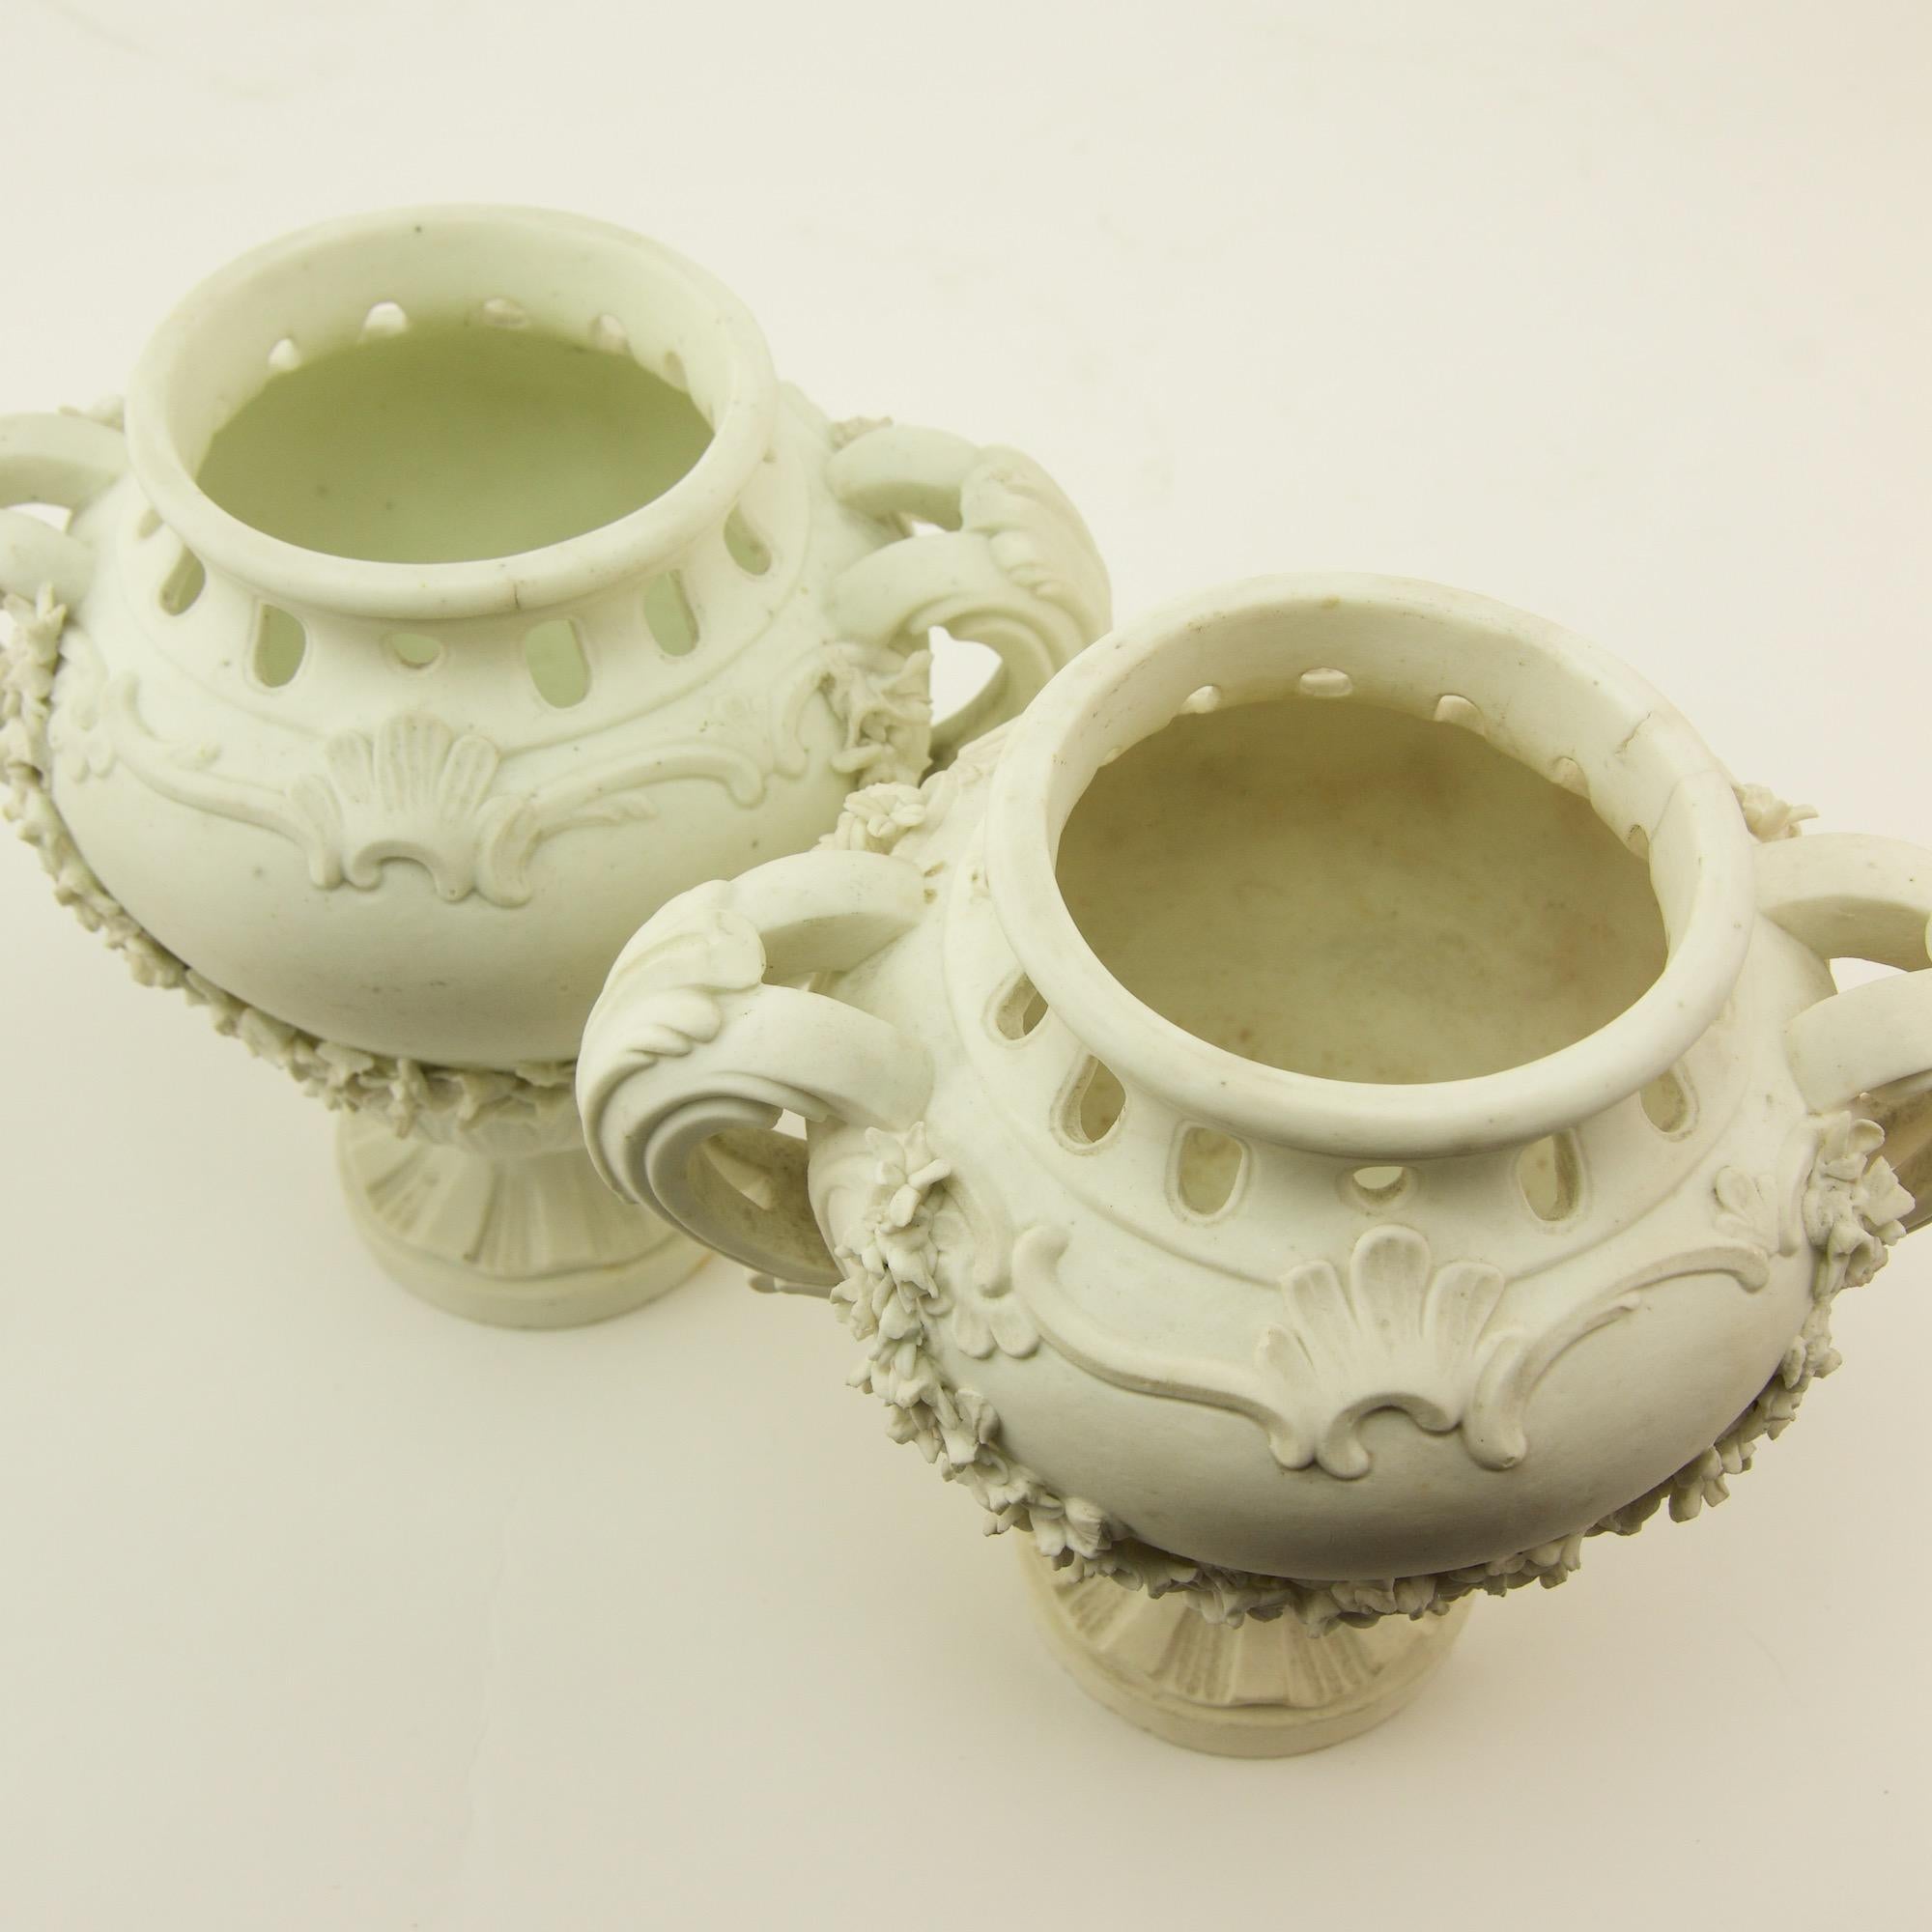 Pair of French Mid-18th Century Biscuit Porcelain Louis XV Vases and Pedestals For Sale 11